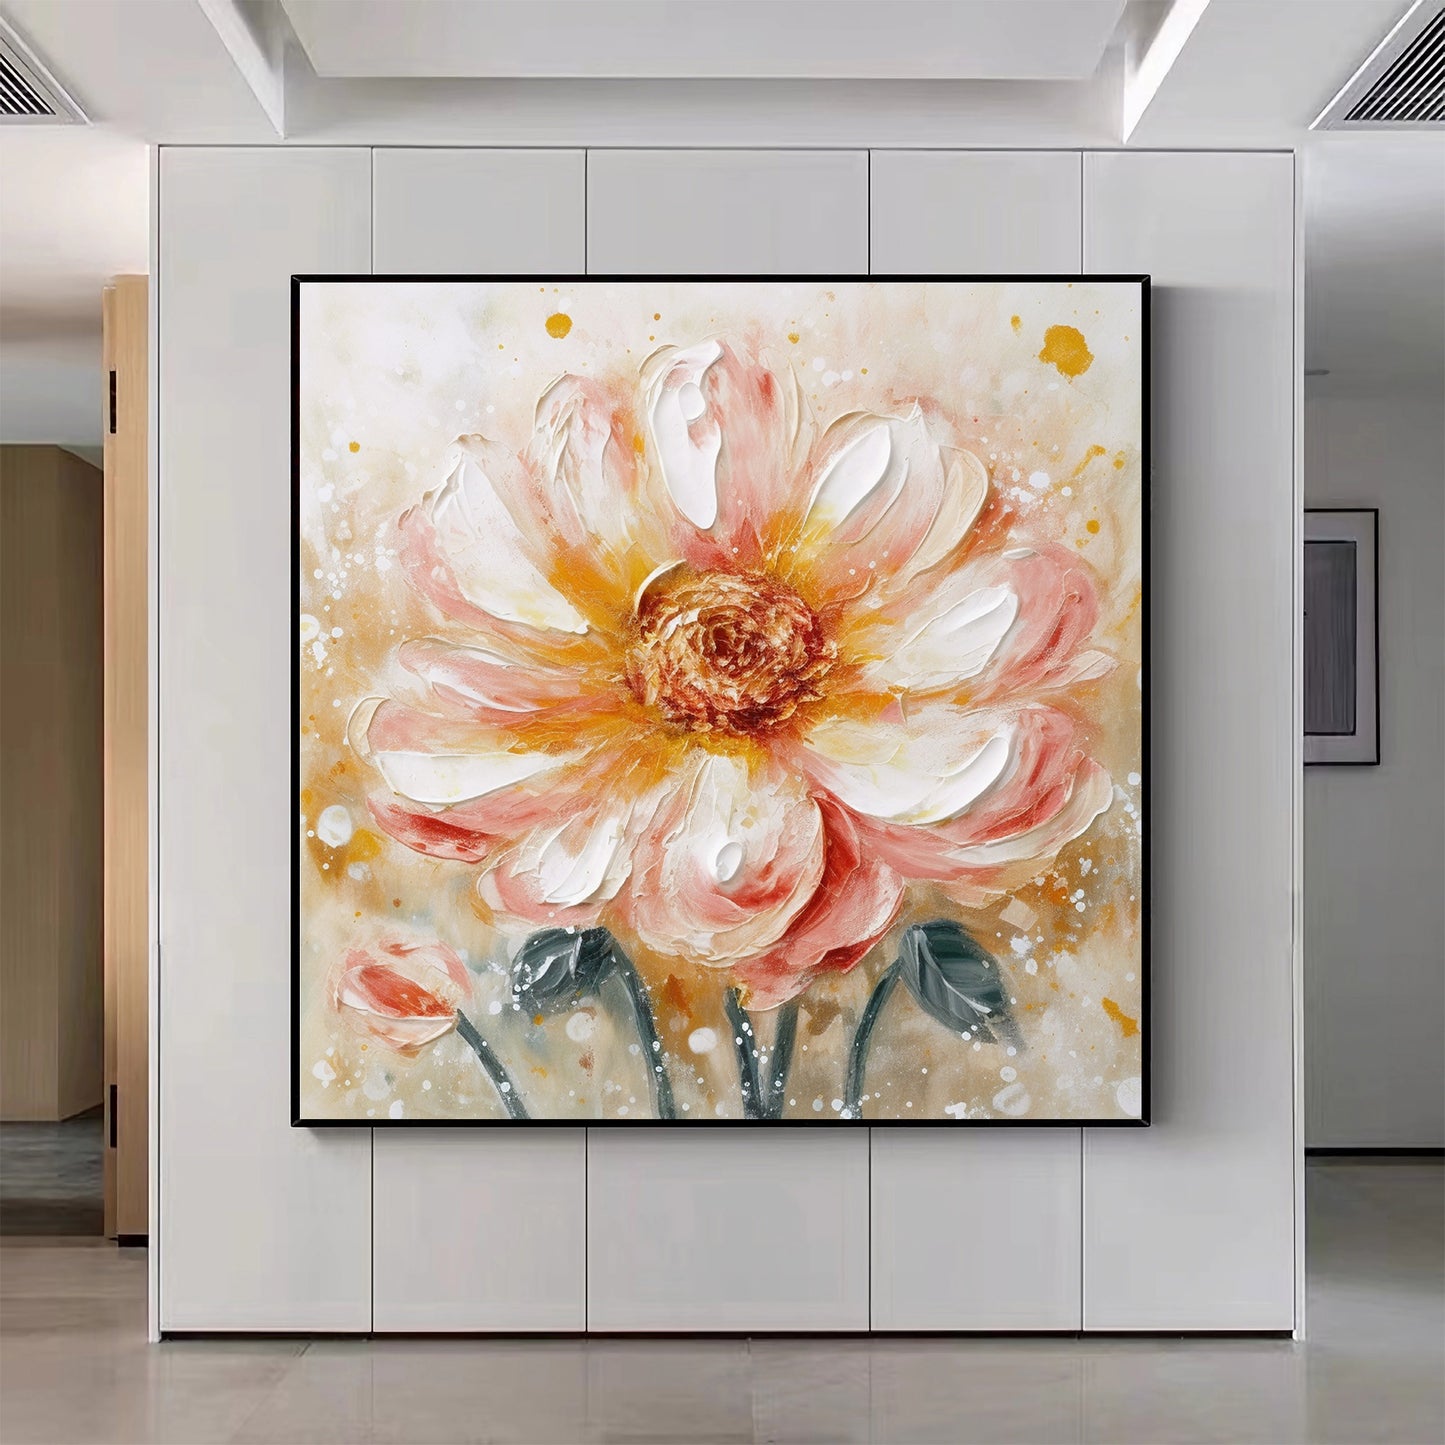 Abstract 3D Flower Oil Painting Texture Floral Wall Art Minimalist Living Room Decor Gift F0416A2311